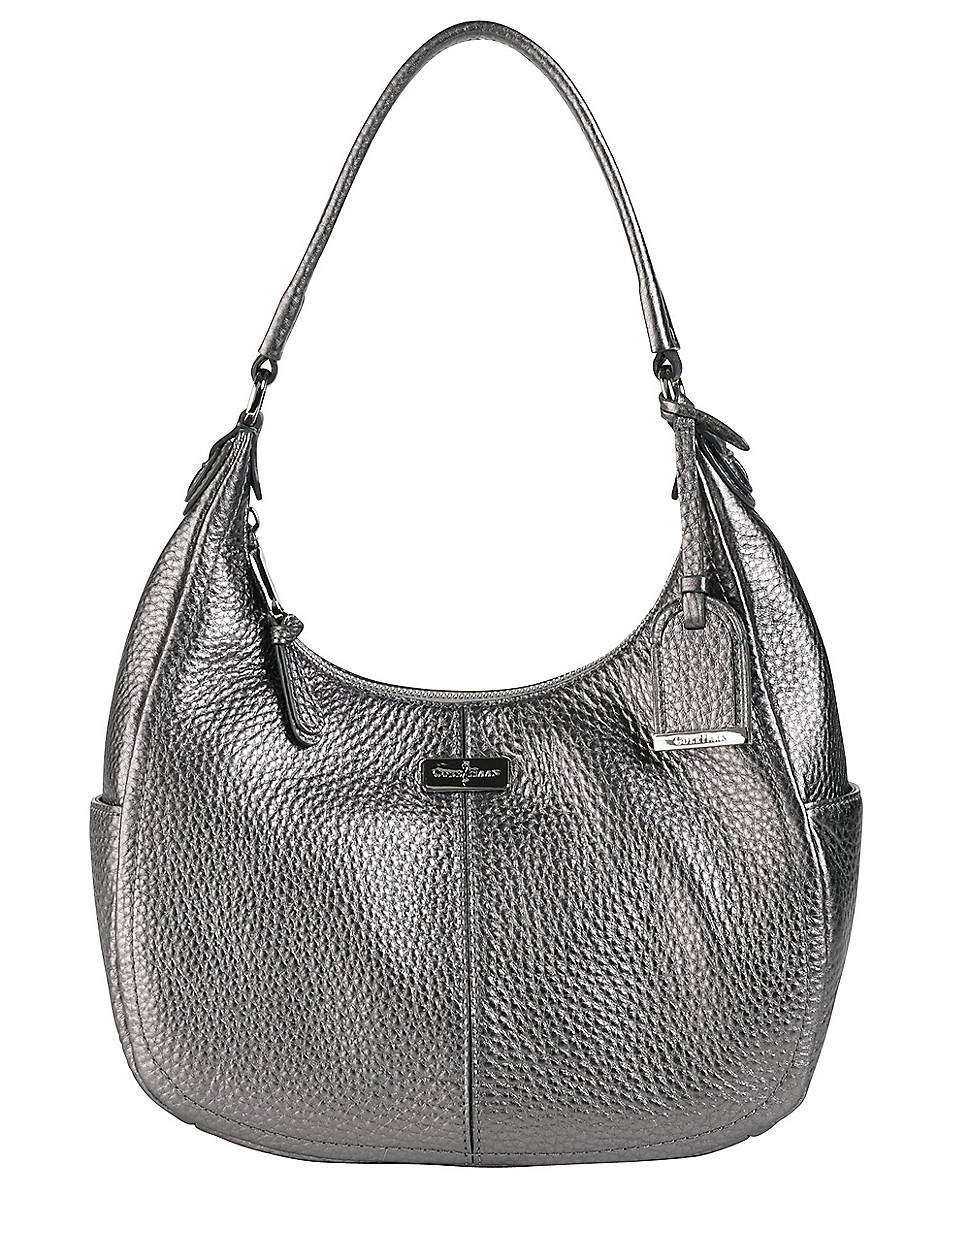 Lyst - Cole Haan Village Leather Small Hobo Bag in Metallic